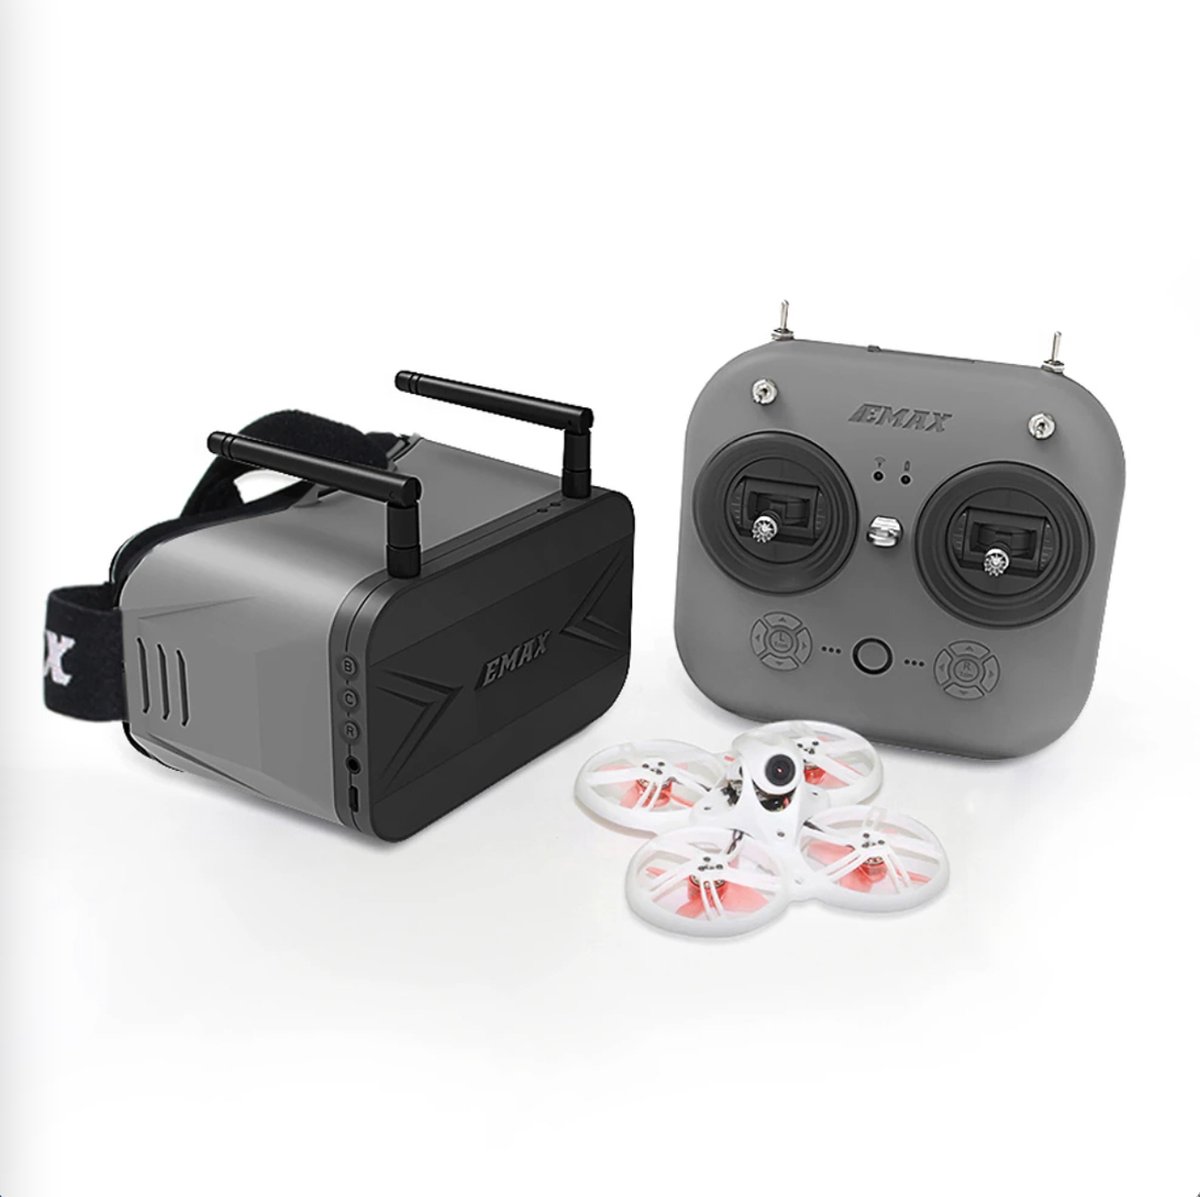 Emax Tinyhawk III Ready to fly race drone set